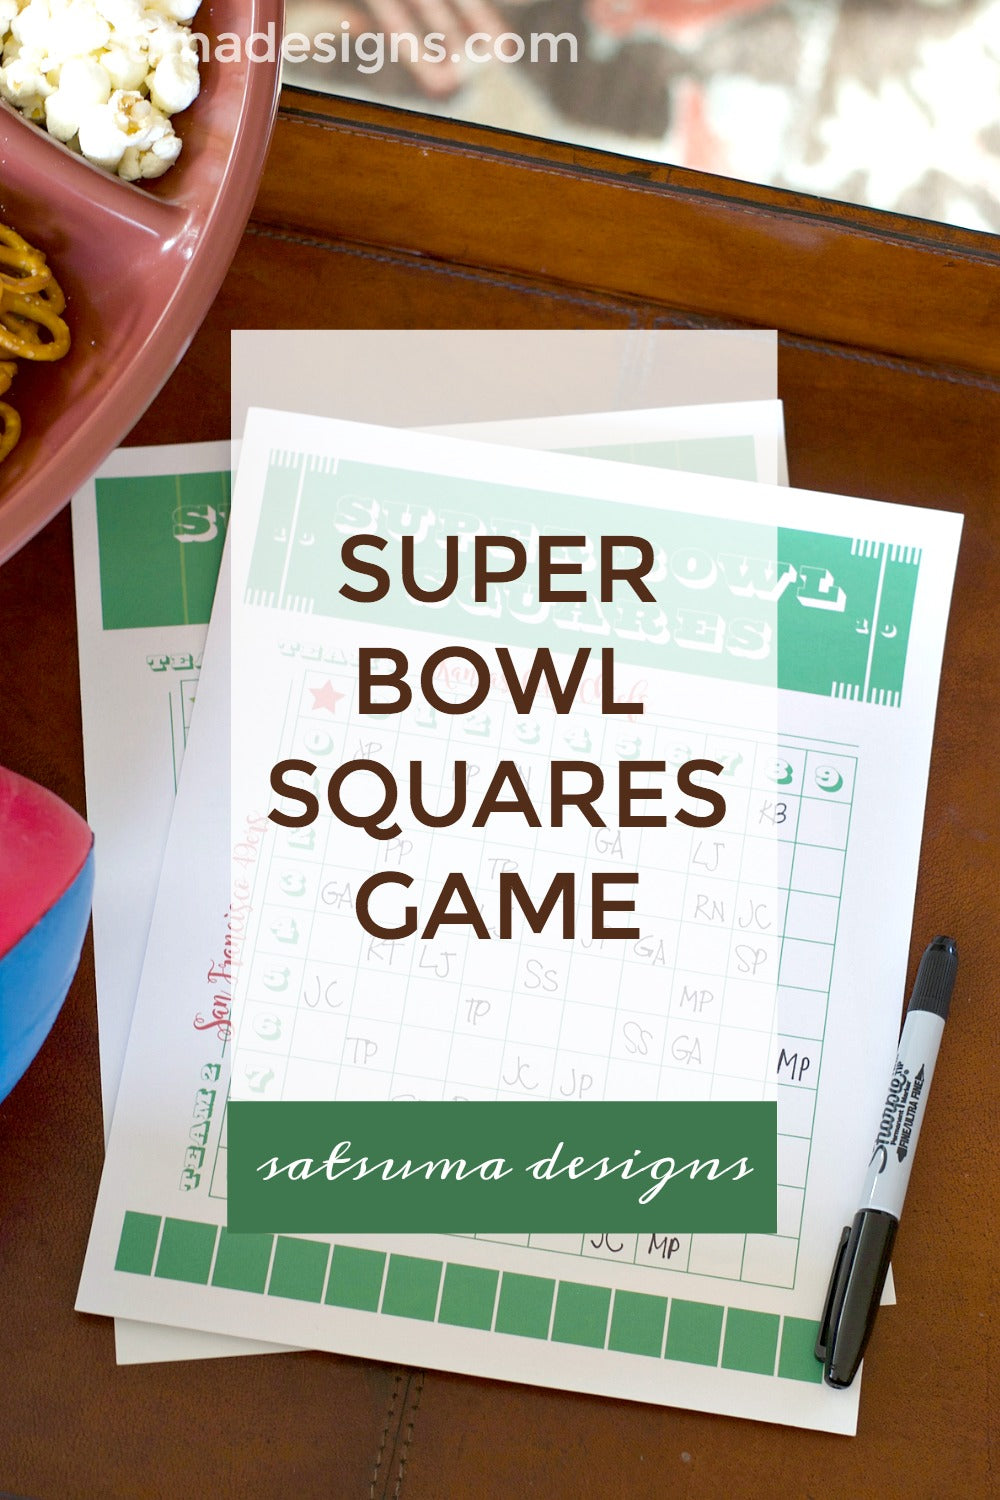 Super bowl squares game printable for your super bowl party. This post has printables for Super Bowl 54 and generic version for any super bowl in the future. Enjoy! #football #footballsquares #printable #superbowl #superbowl54 #gameday #satsumadesigns